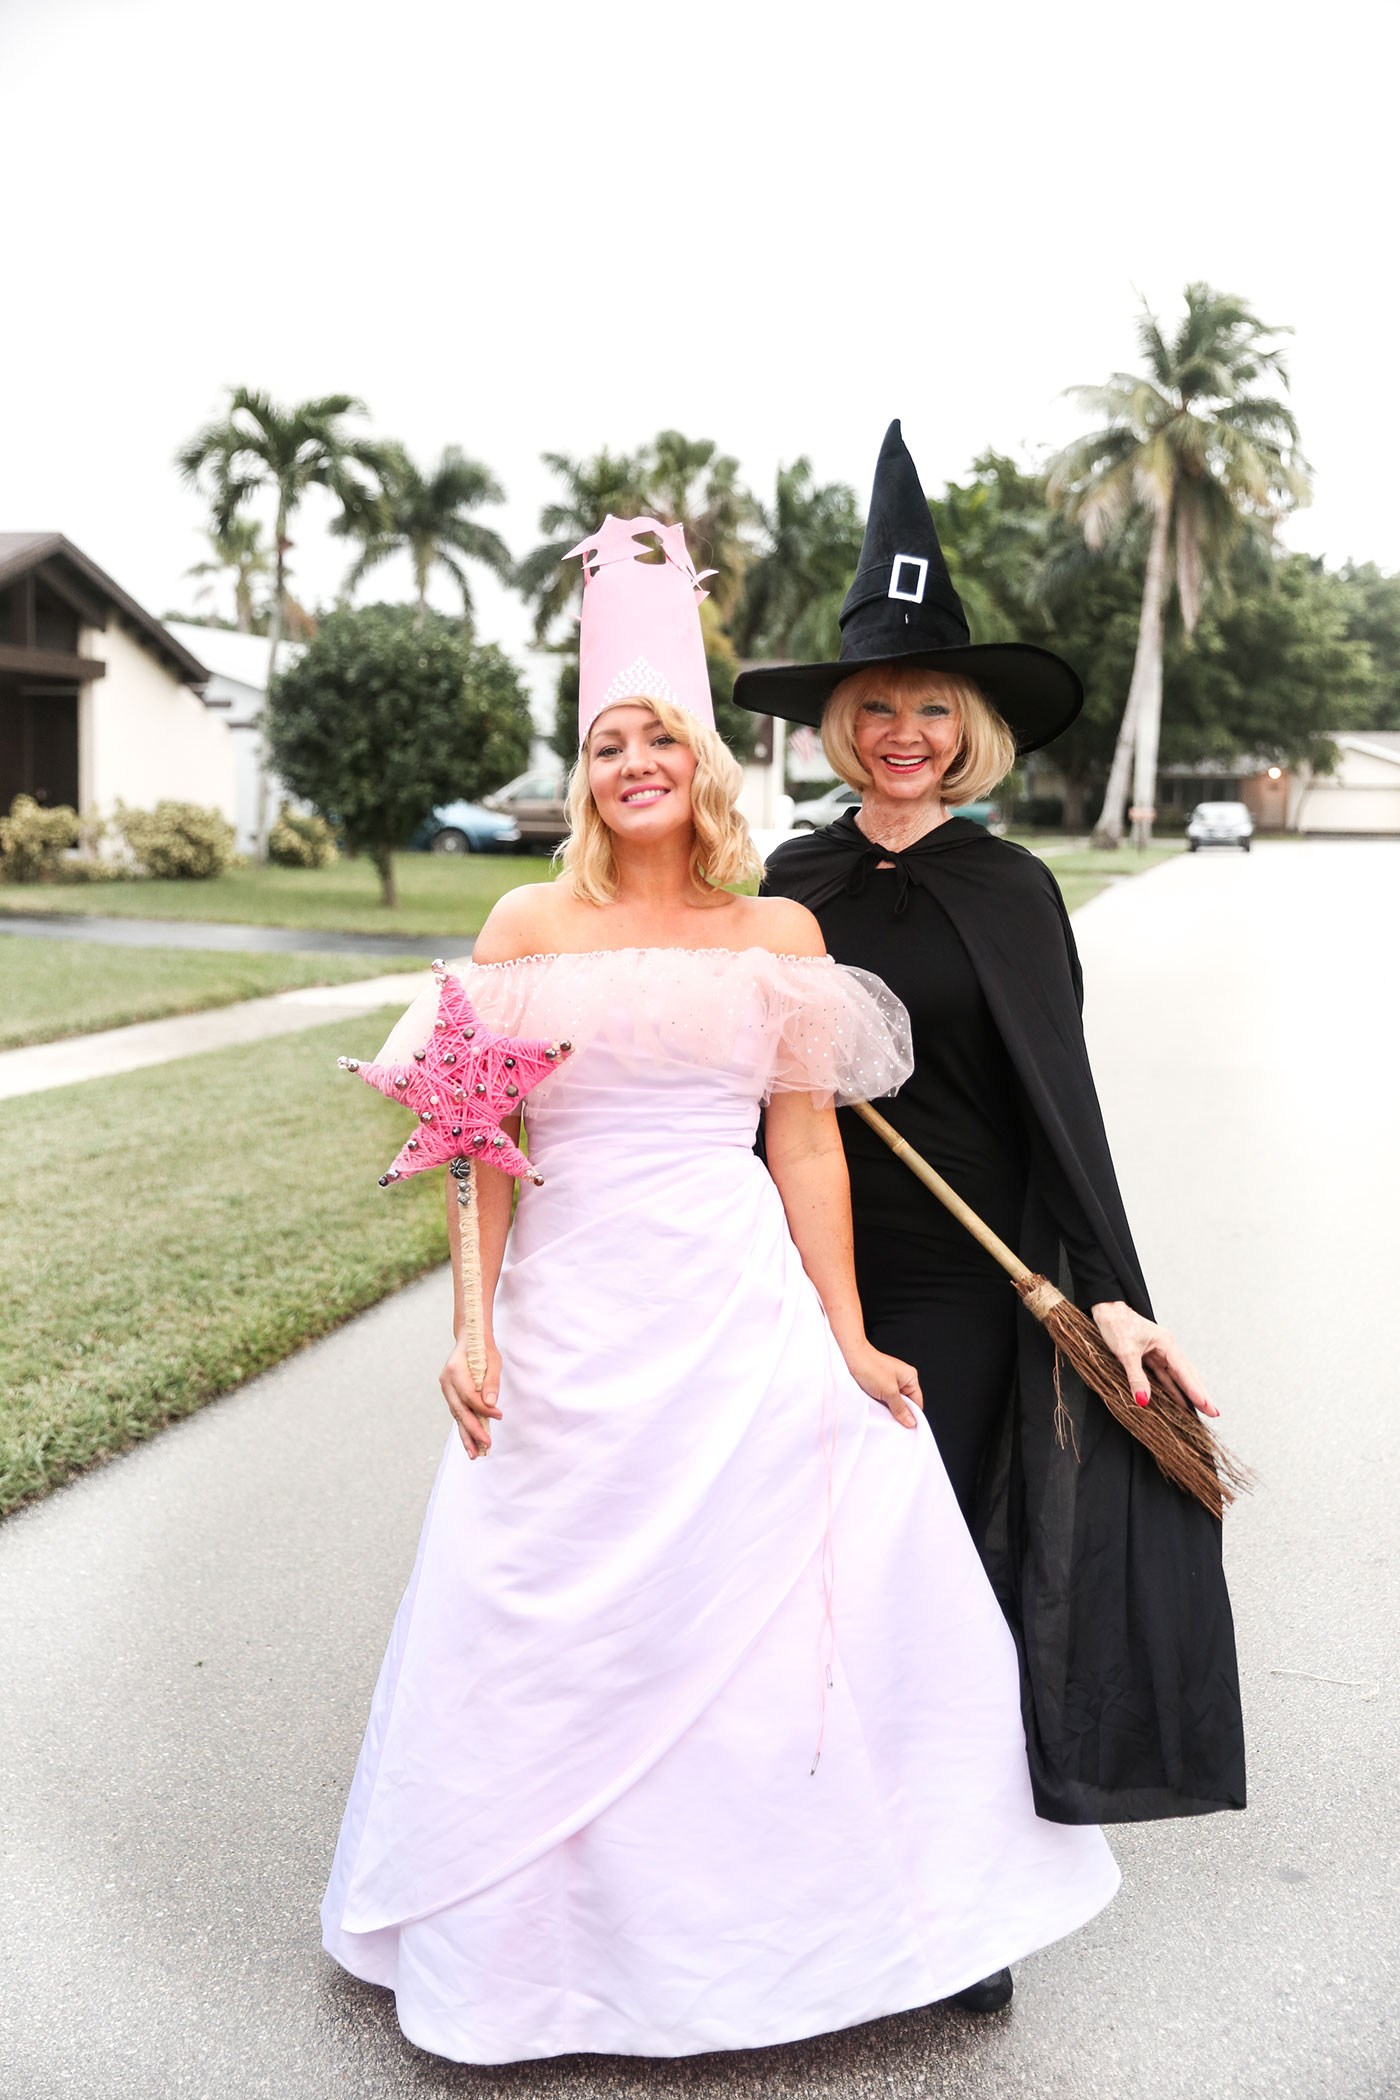 Glinda The Good Witch and The Wicked Witch Of The West costumes